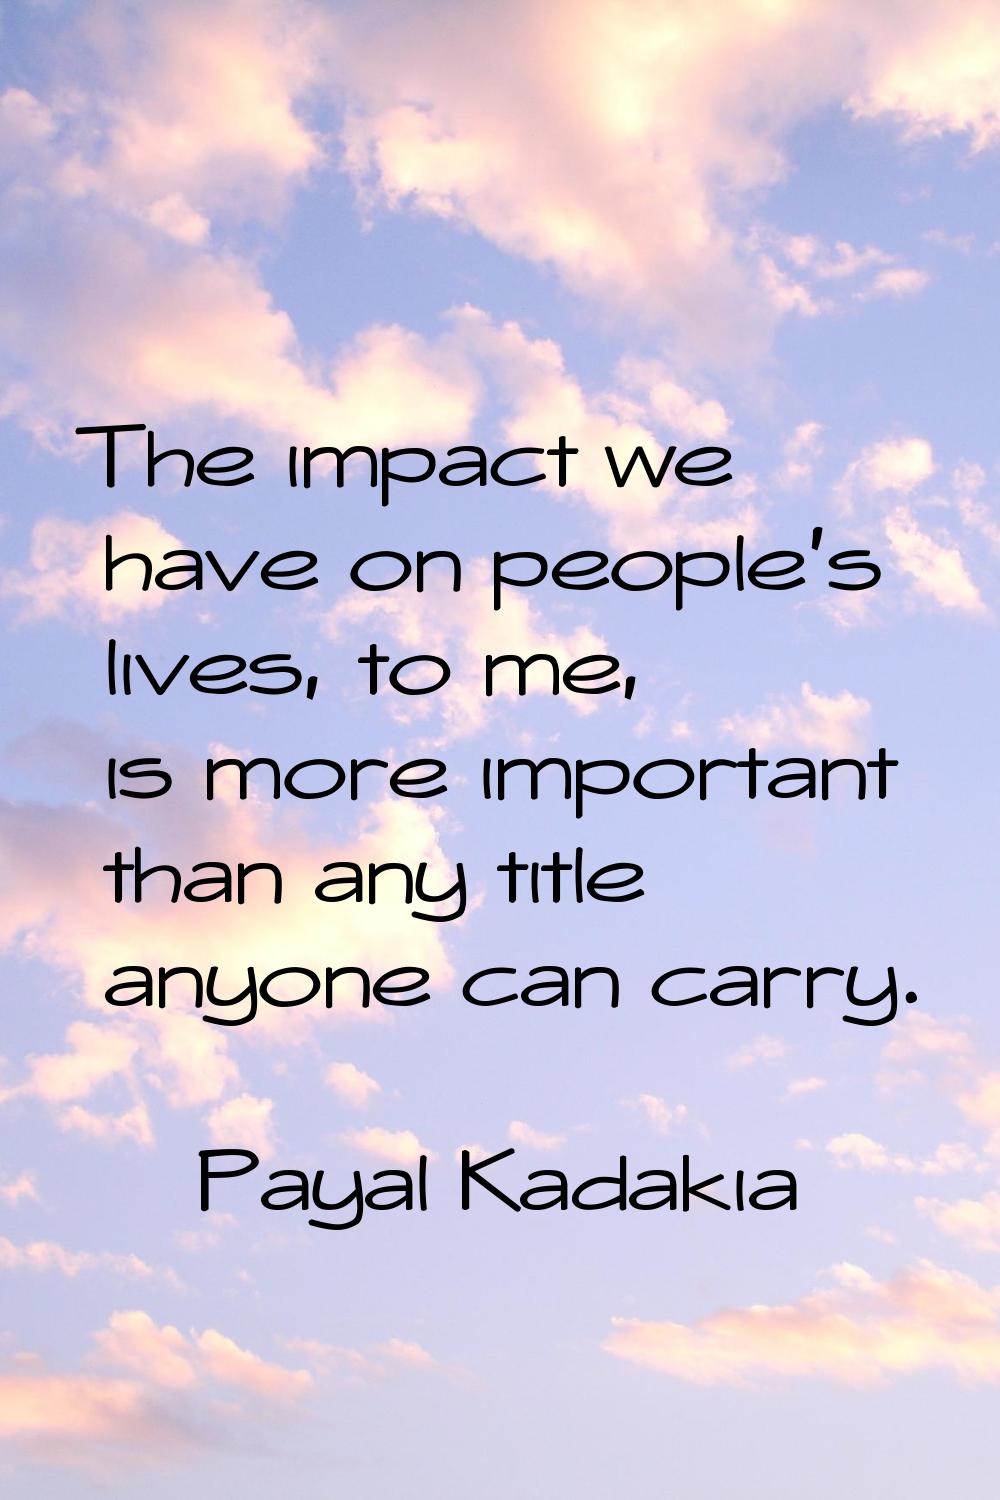 The impact we have on people's lives, to me, is more important than any title anyone can carry.